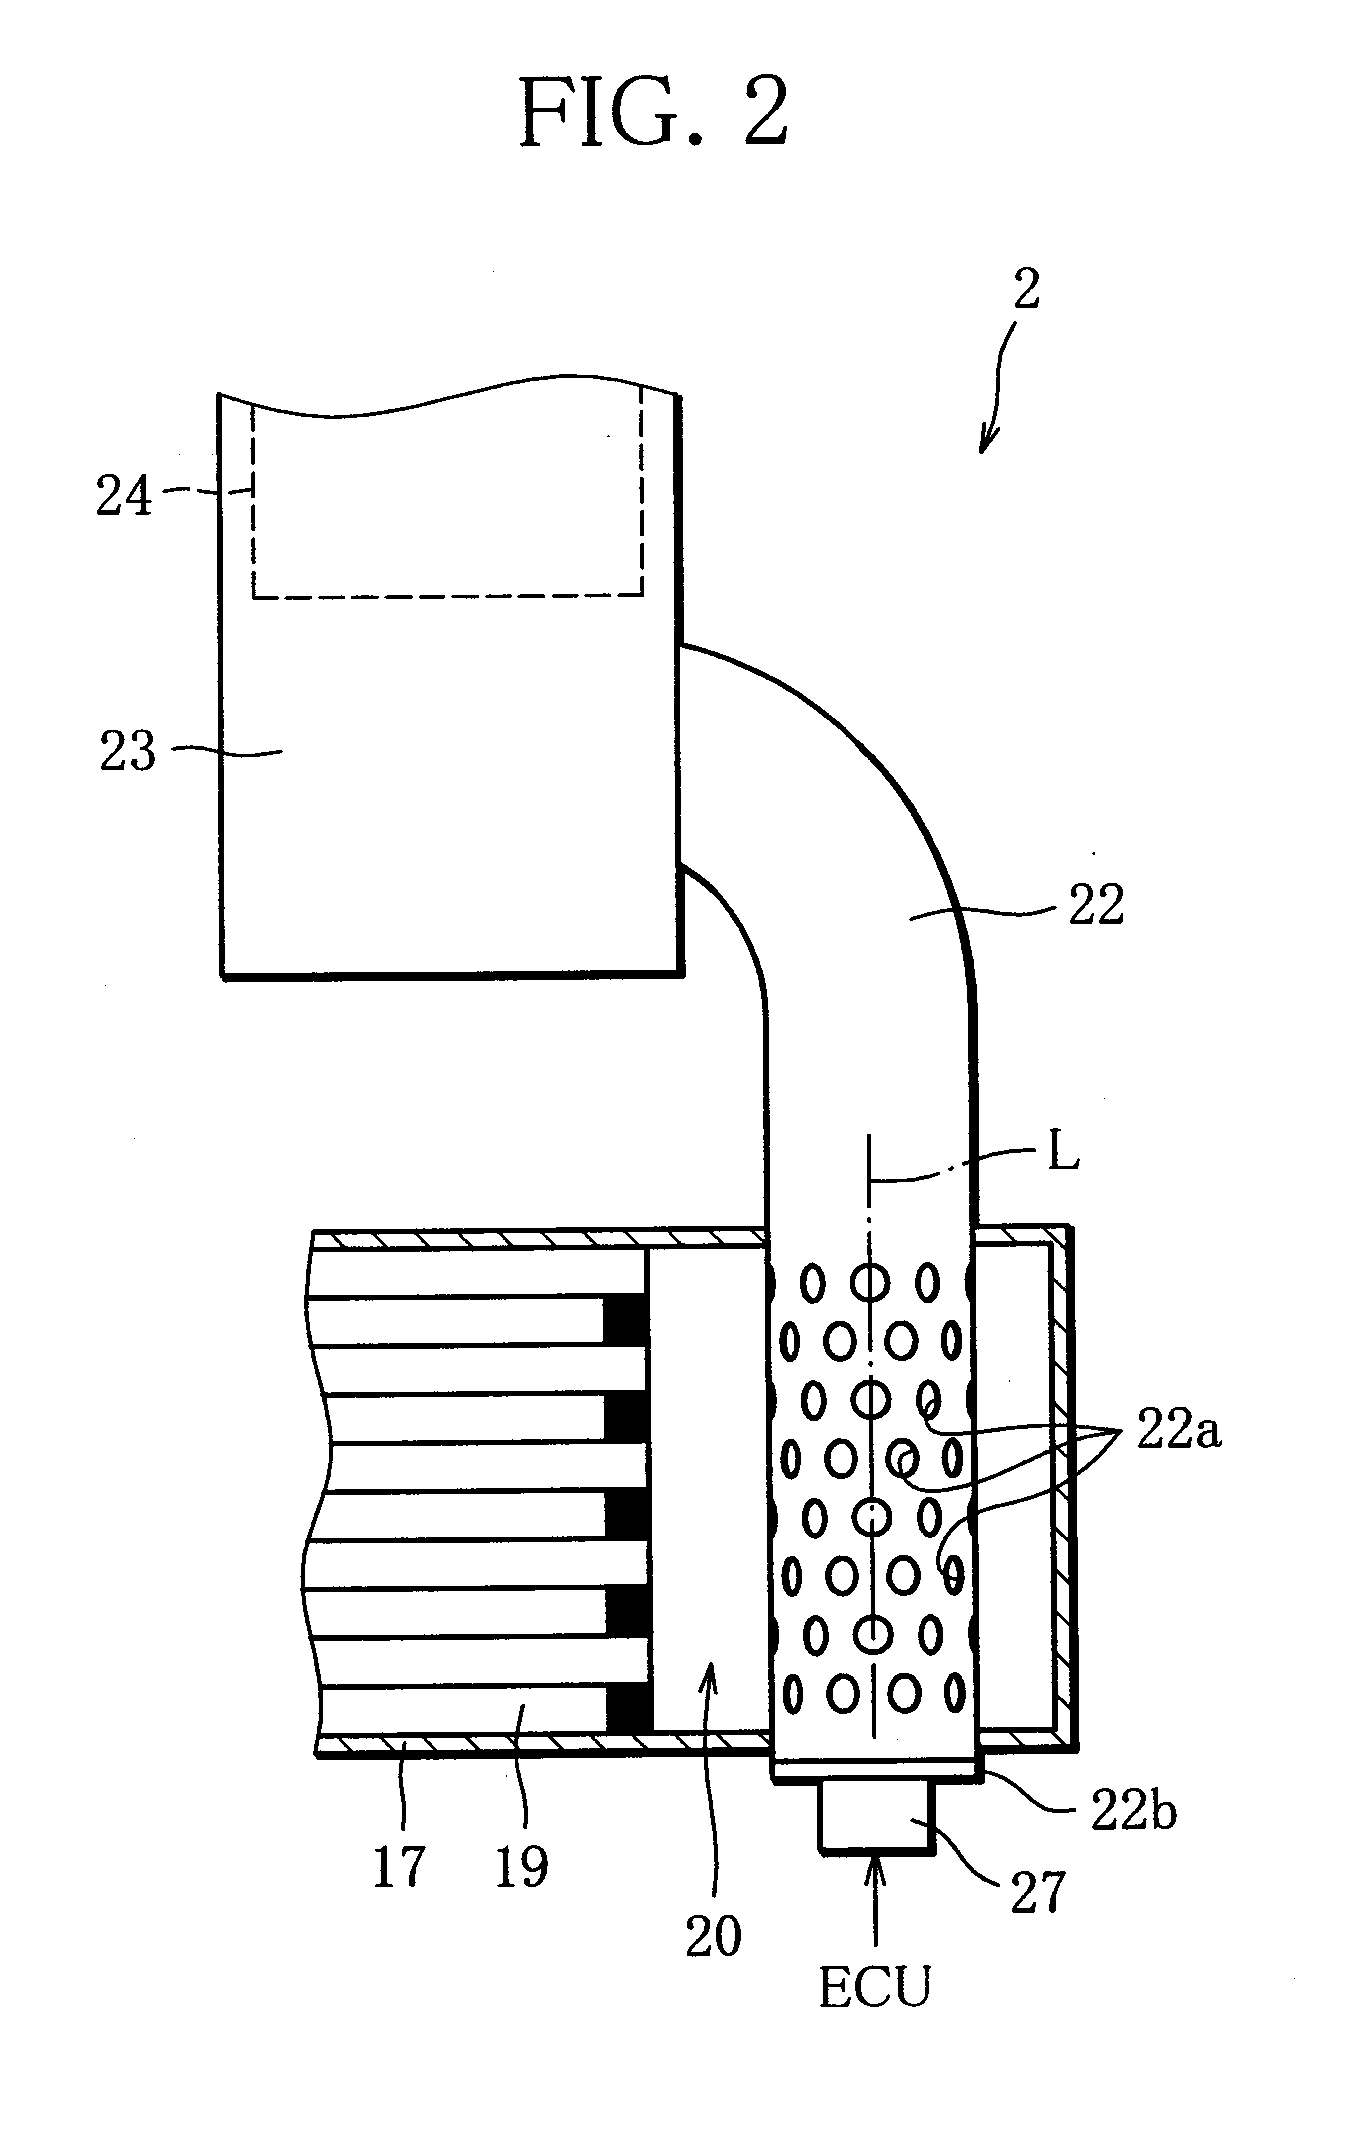 Exhaust purification apparatus for an engine